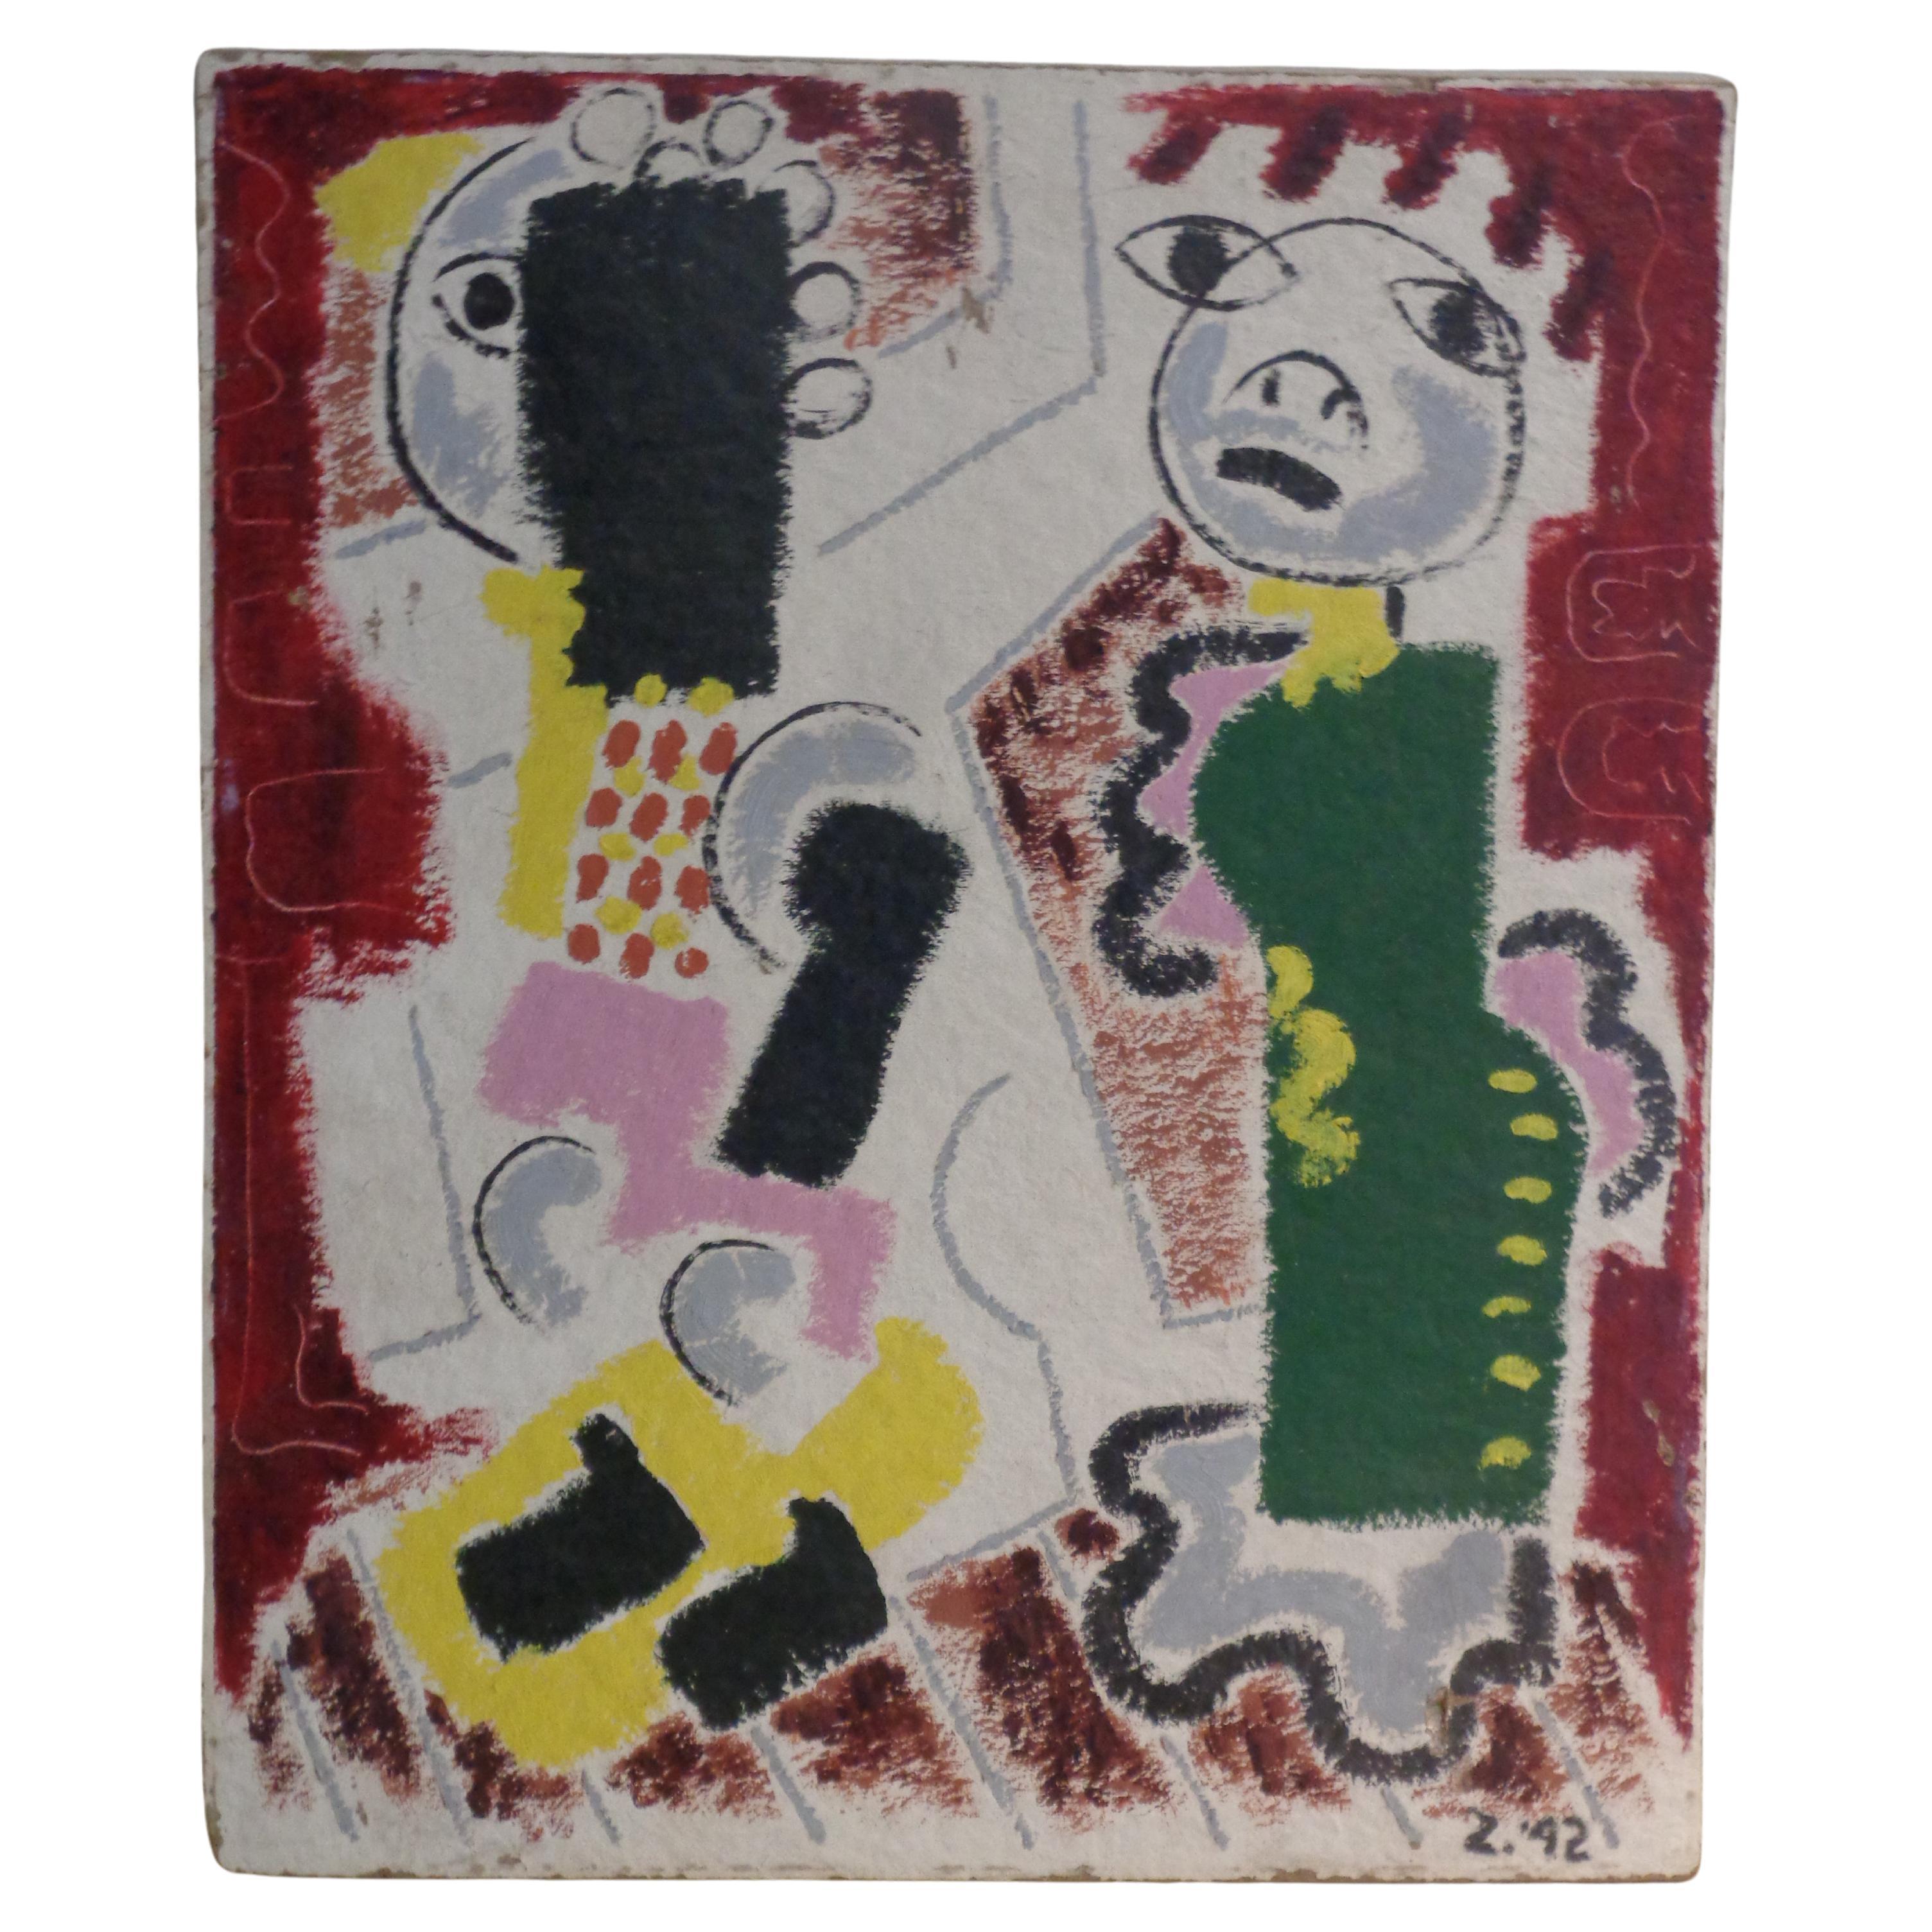 Primitive Figural Abstract Painting - Zoute 1942 For Sale